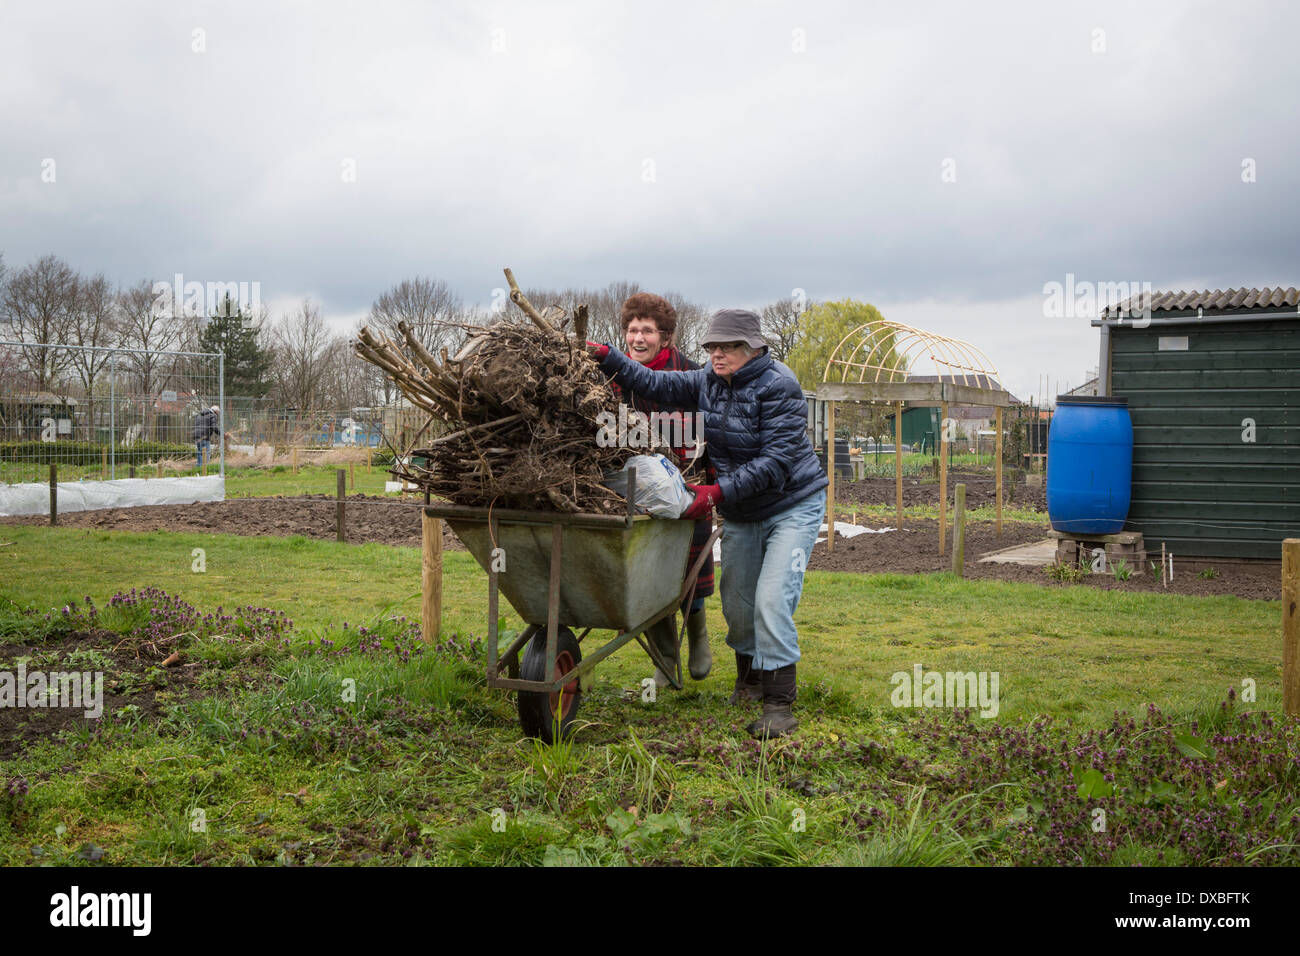 Two women wit a wheelbarrow  carrying rubbish during cleaning day at the allotment garden Stock Photo